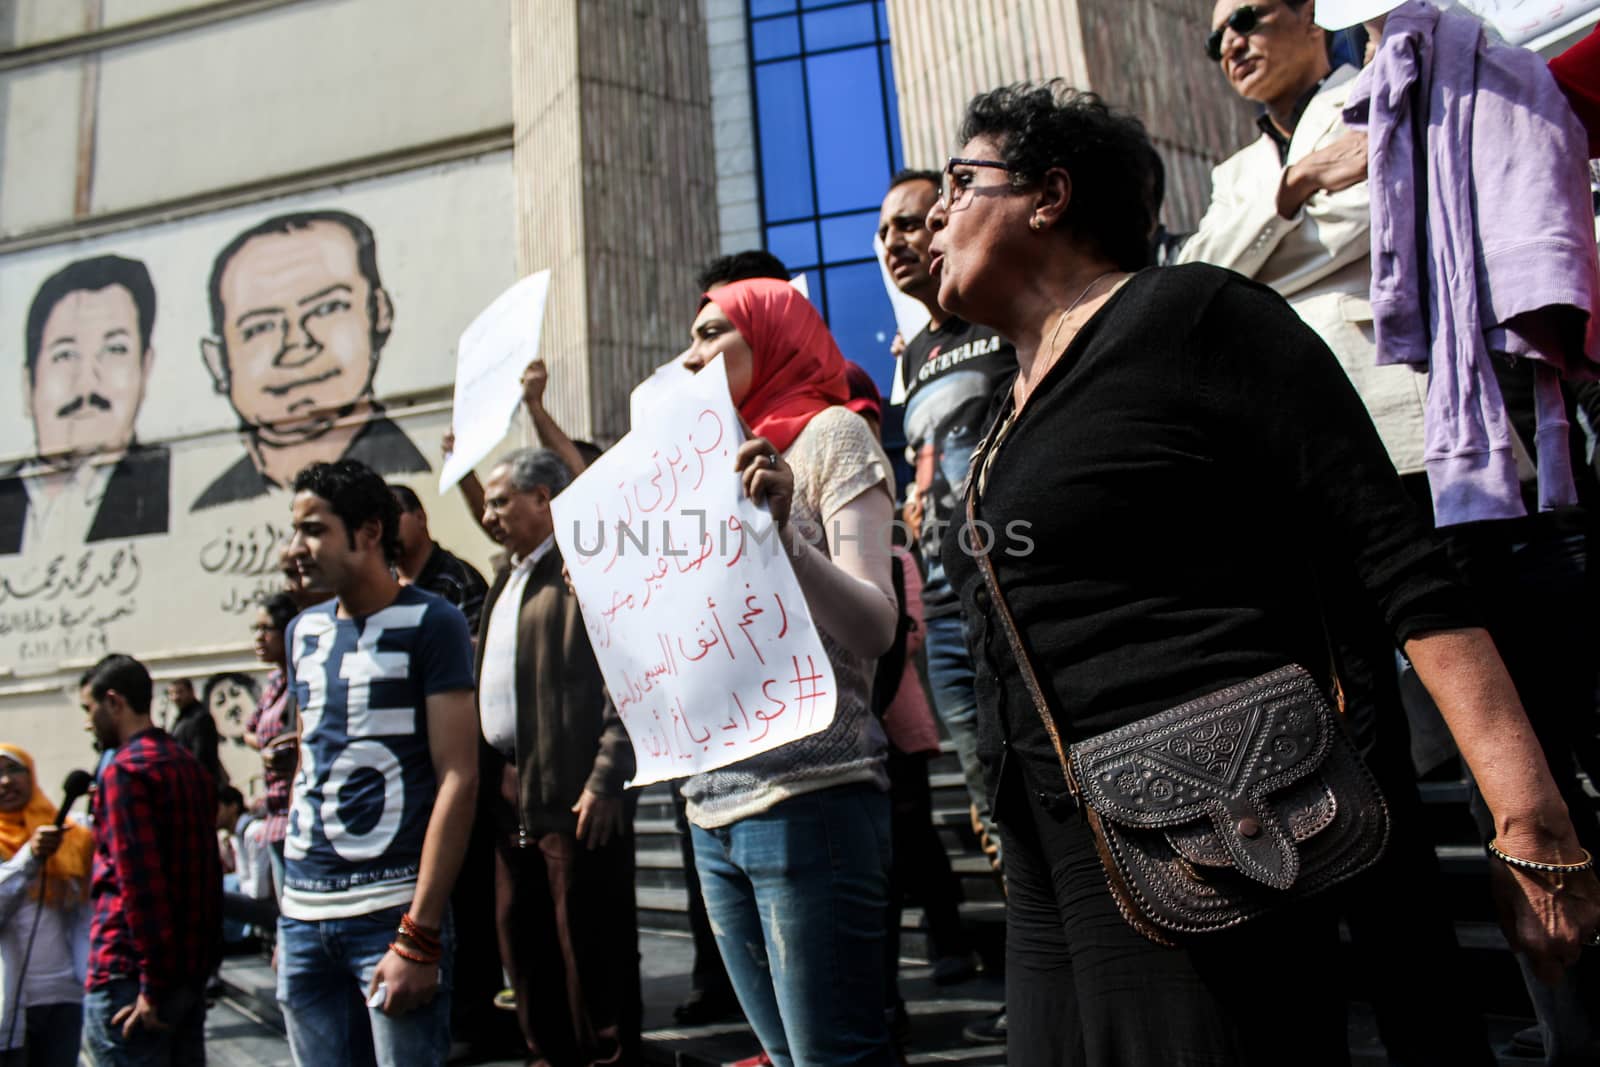 EGYPT, Cairo: Protesters hold banners against Egypt's decision to cede sovereignty over two Red Sea islands, Sanafir and Tiran, to Saudi Arabia on April 13, 2016 in Cairo, before the syndicate of journalists building. Online, many Egyptians have accused their once-popular President, Abdel-Fattah el-Sissi, of giving up land to curry favor with the Saudis. On Twitter, the hashtag I feel like selling what to Saudi Arabia trended on April 12, 2016 with commentators suggesting Egypt flog everything from self-serving lawmakers to President Abdel-Fattah el-Sissi himself.